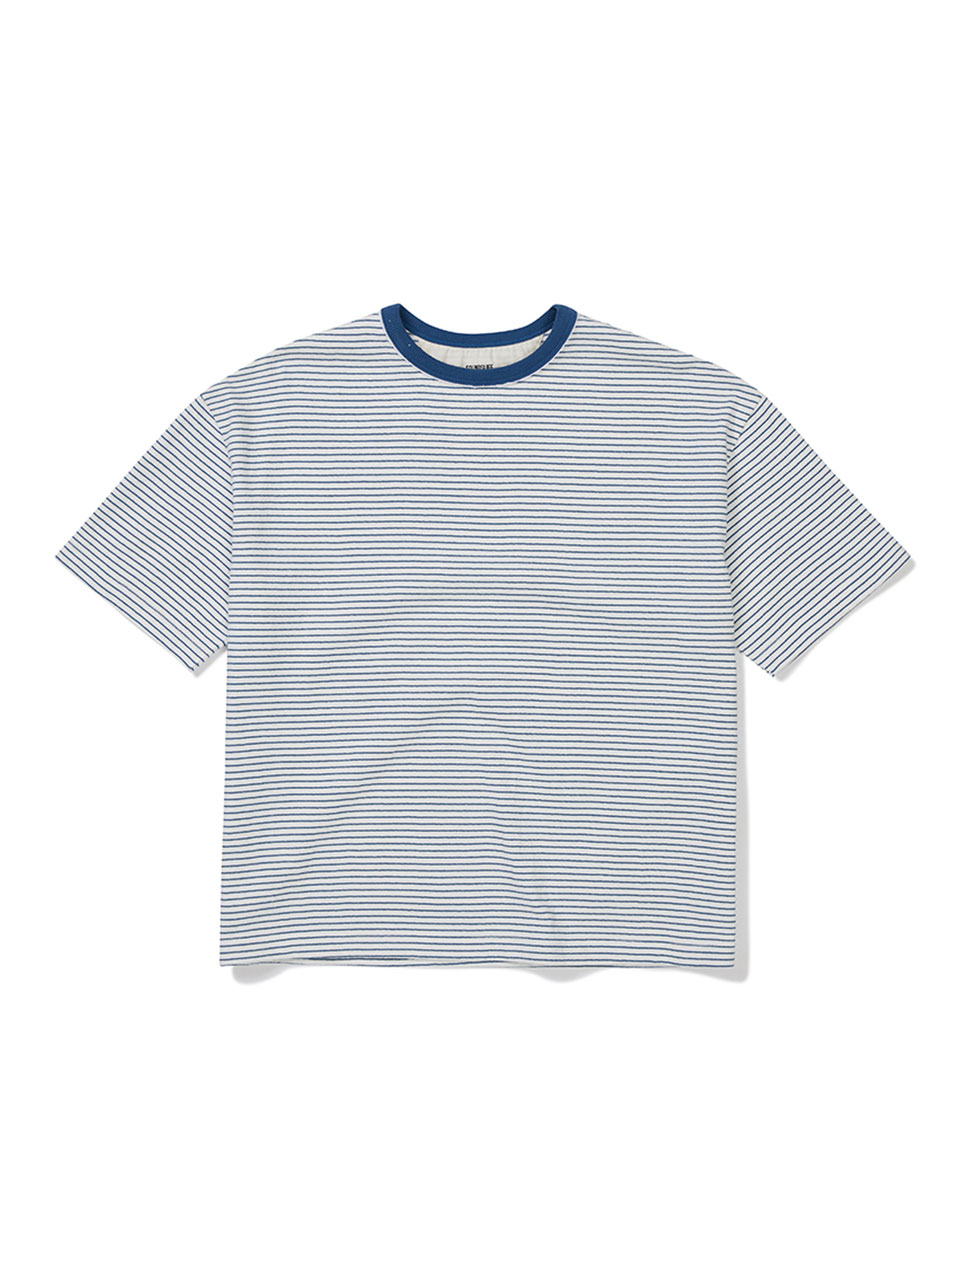 SOUNDSLIFE - Vacation Striped Tee White